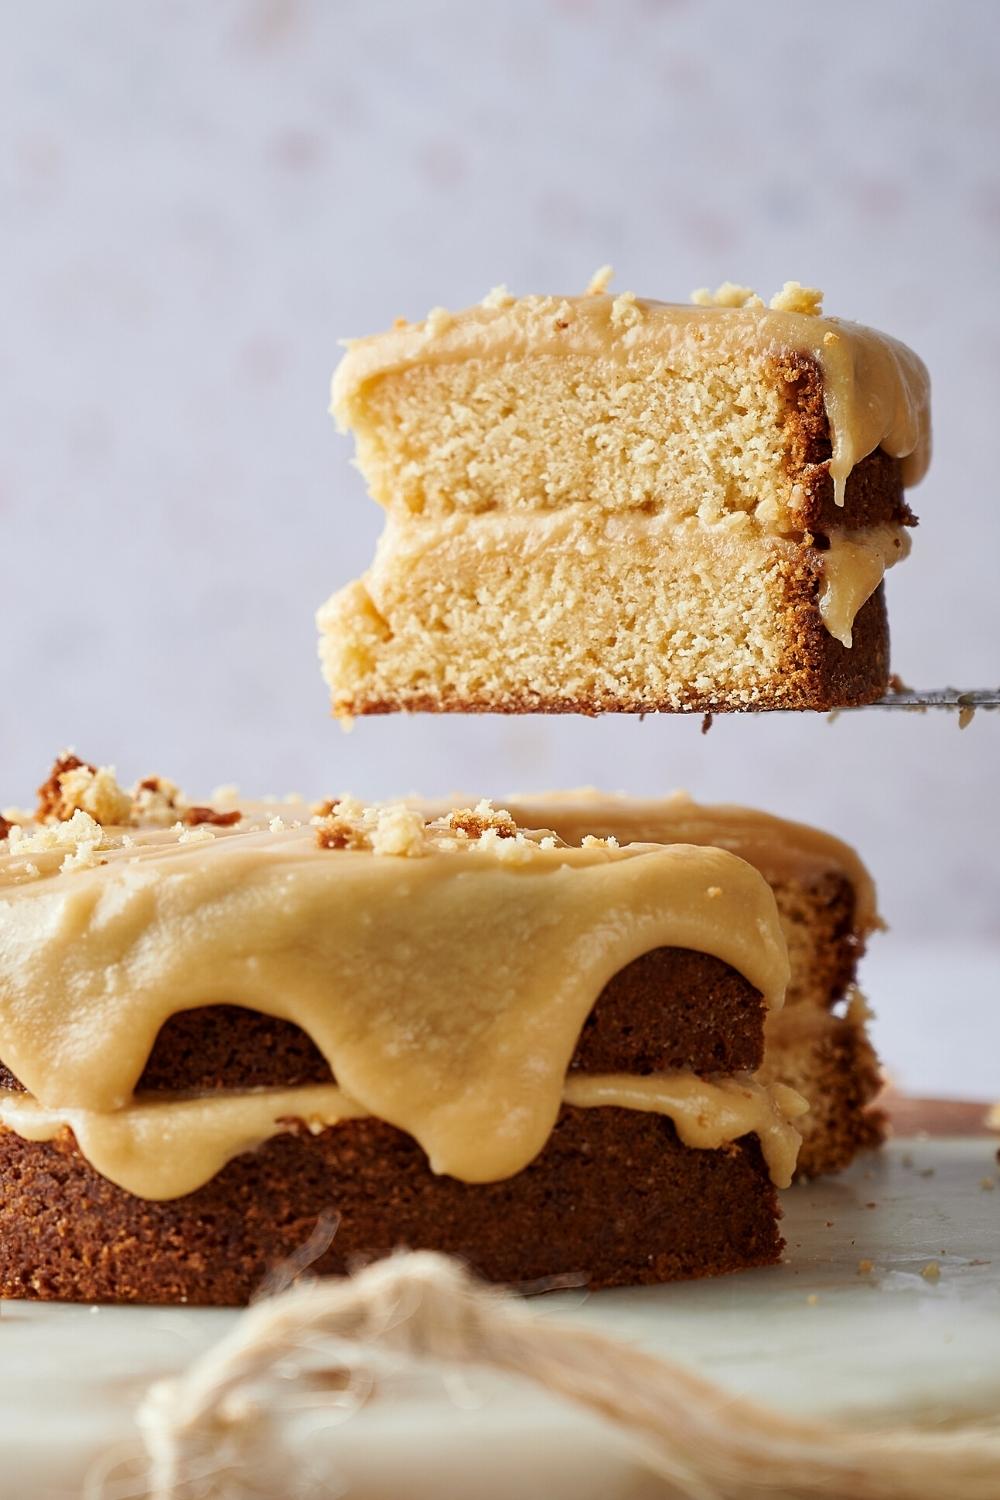 A slice of caramel cake being held of the whole caramel cake.